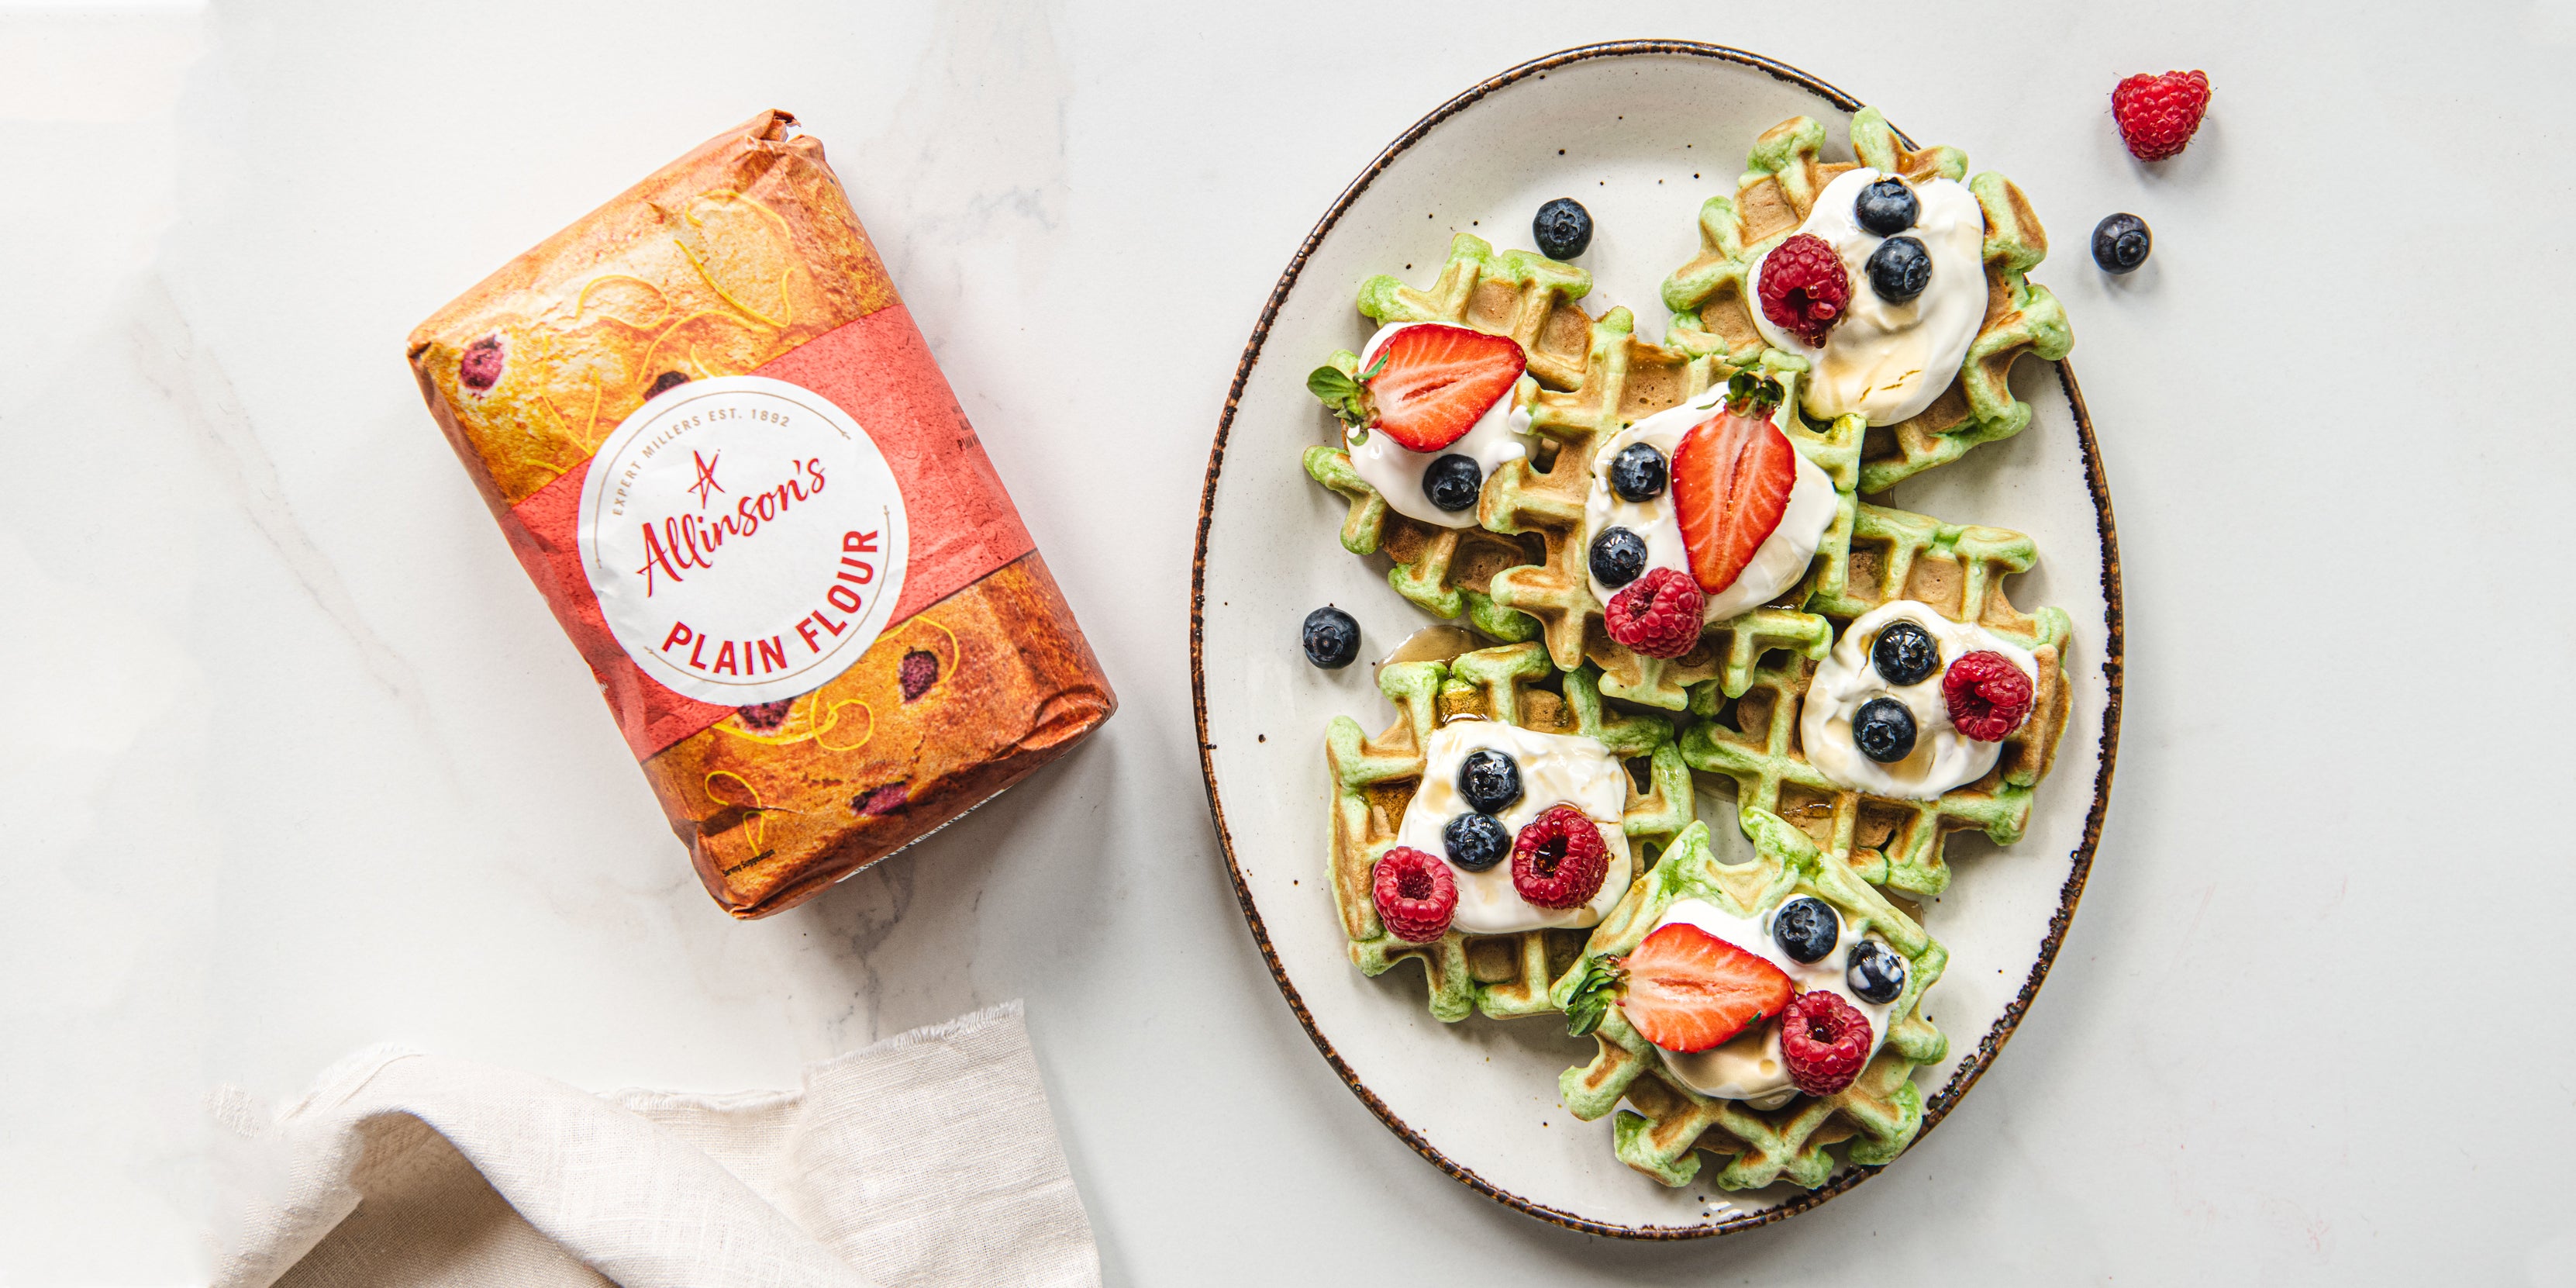 Flat lay shot of Pandan Waffles served on a plate, sprinkled with mixed berries next to a bag of Allinson's Plain flour